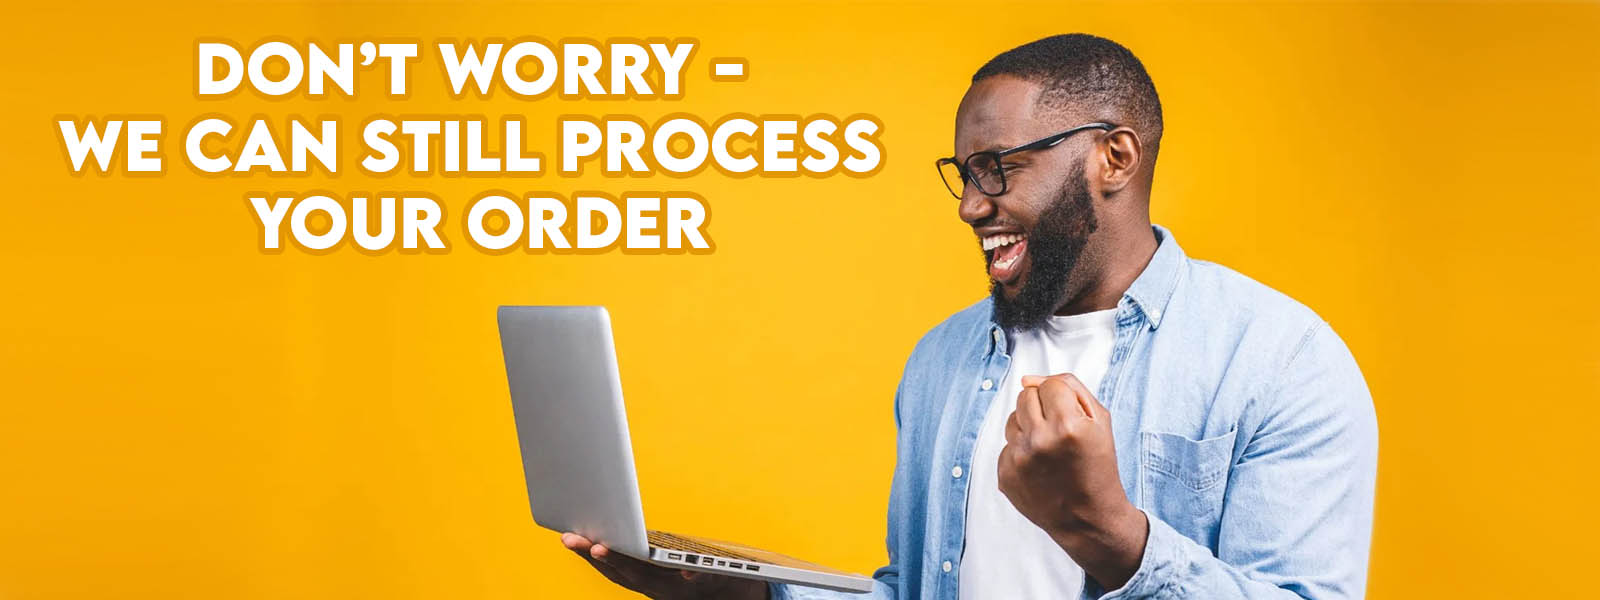 We can still process your order